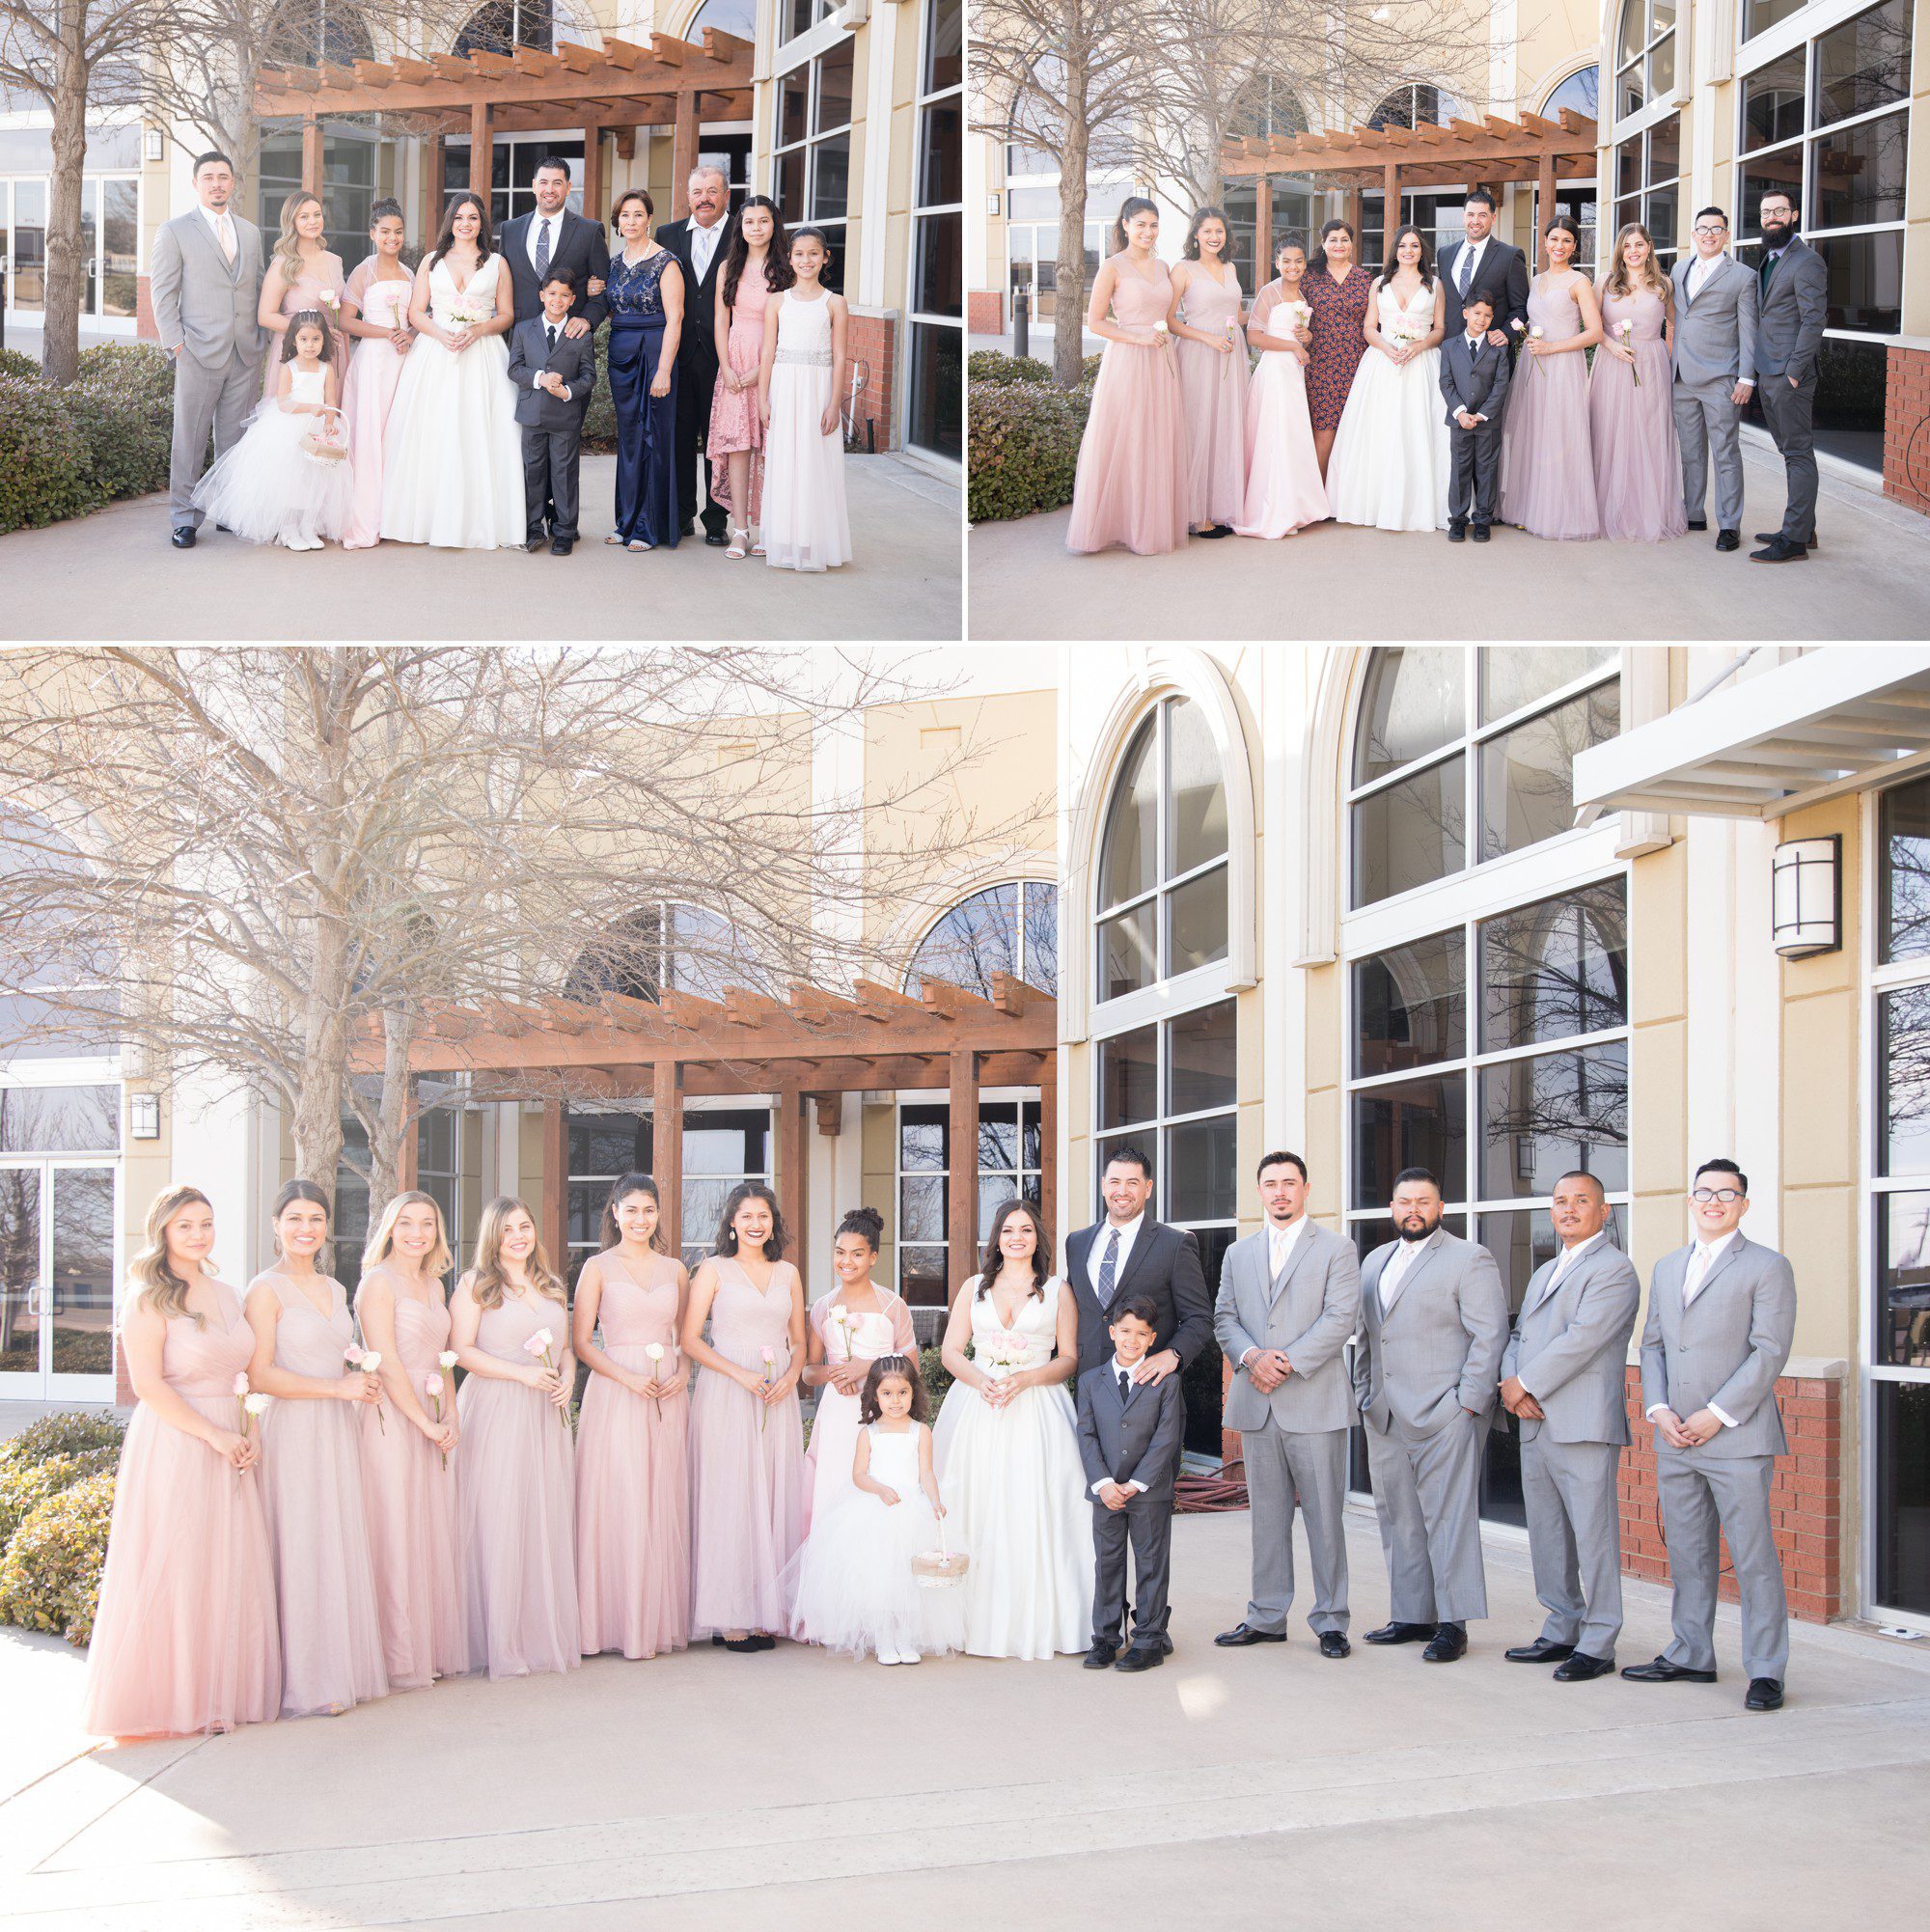 Bride and groom with wedding party and family before wedding ceremony at Lawton First Assembly Church in Lawton OK, photos by Krista Lee photography Nashville TN